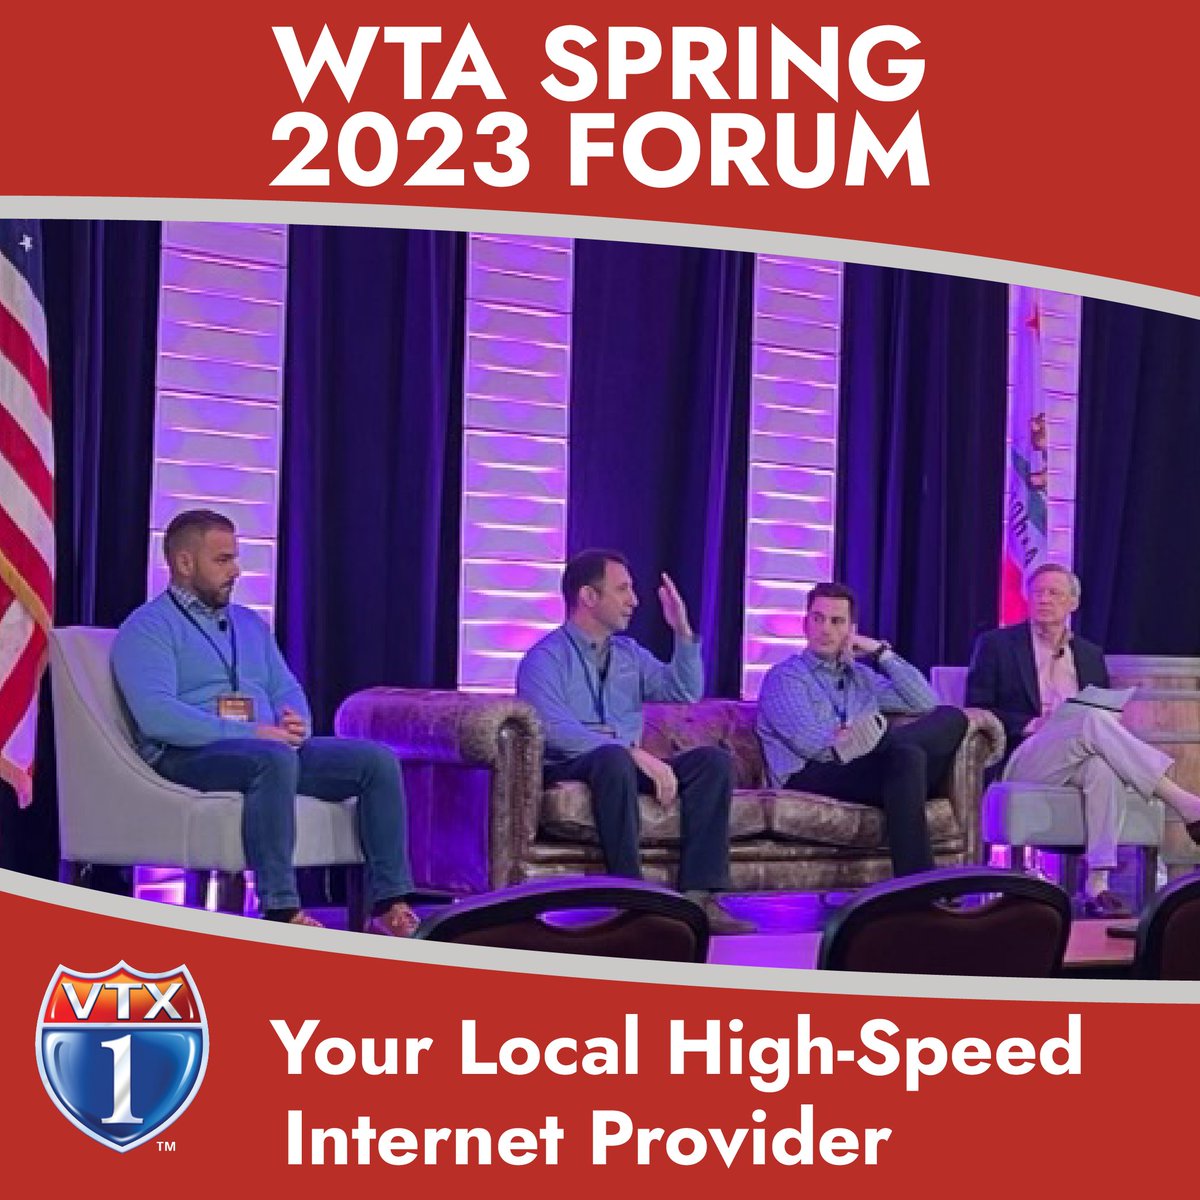 VTX1 Company's own CTO Sebastian Ivanisky was sharing his expertise at the #WTASpring2023Forum presented by @WTAdvocates. Sebastian discussed what the best Last Mile Technology to deploy is: Fiber or Wireless & when.